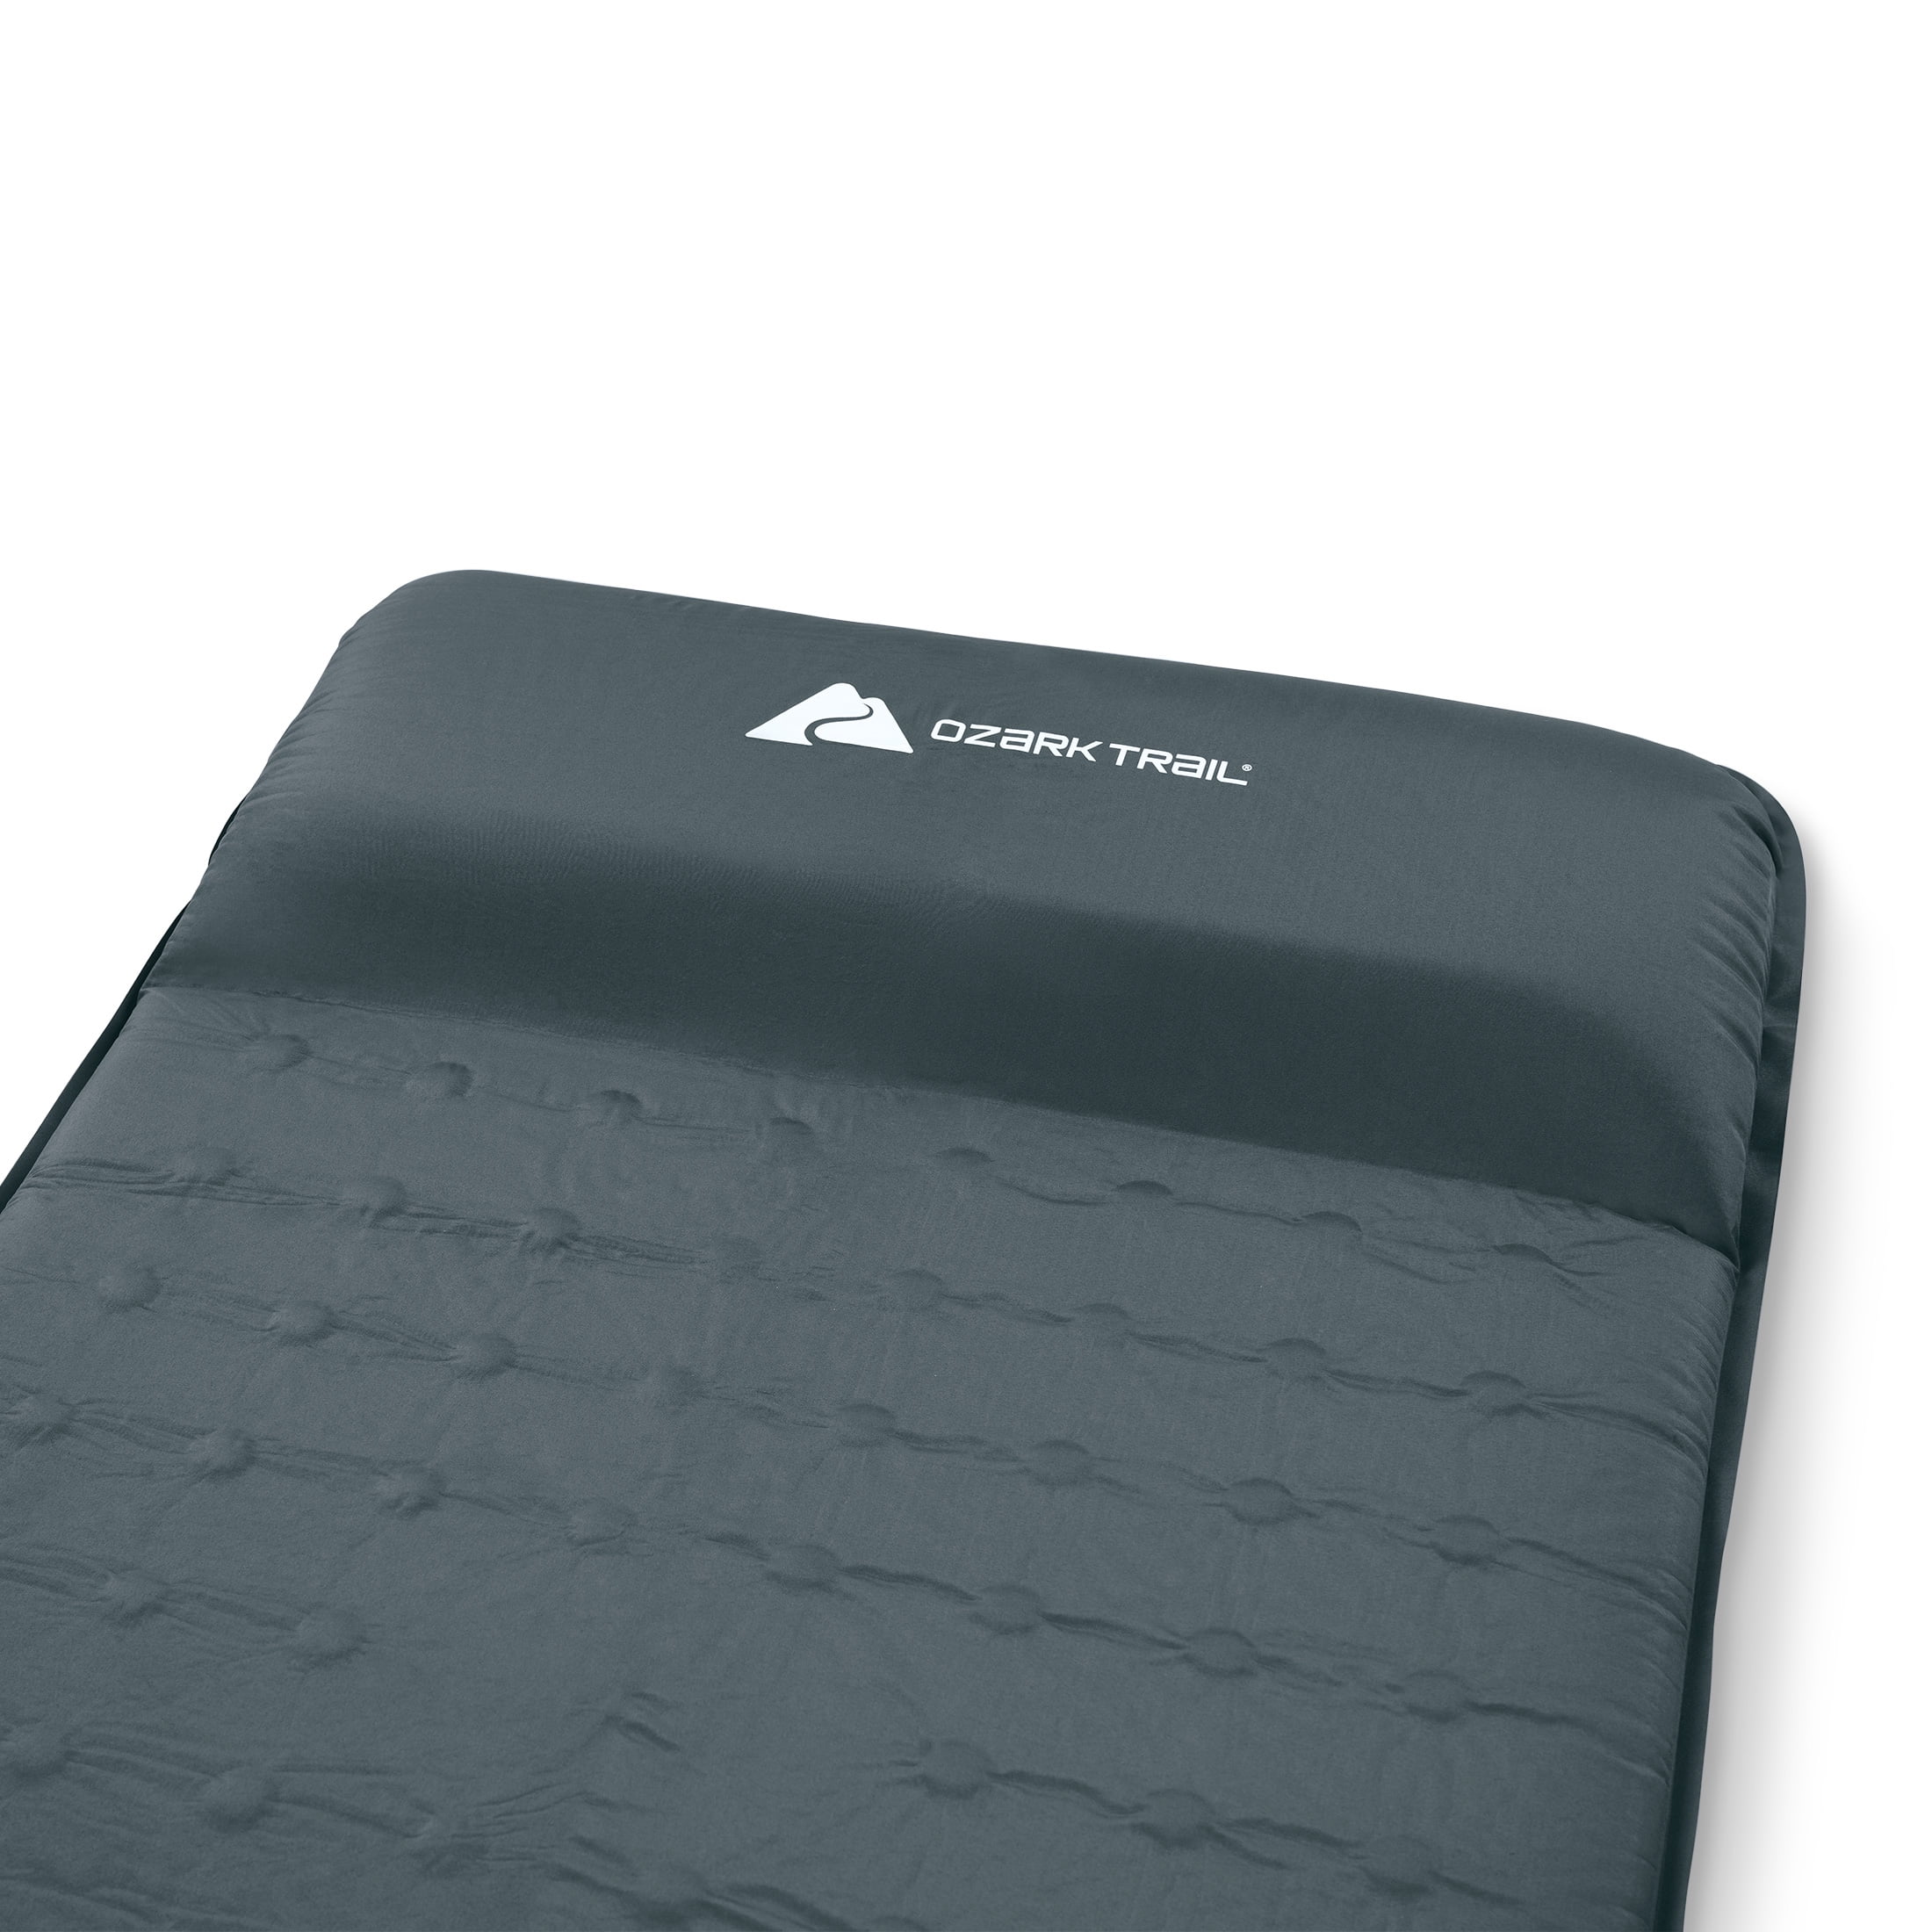 Ozark Trail Self-Inflating Camp Pad with Pillow - Grey, Adult, 78